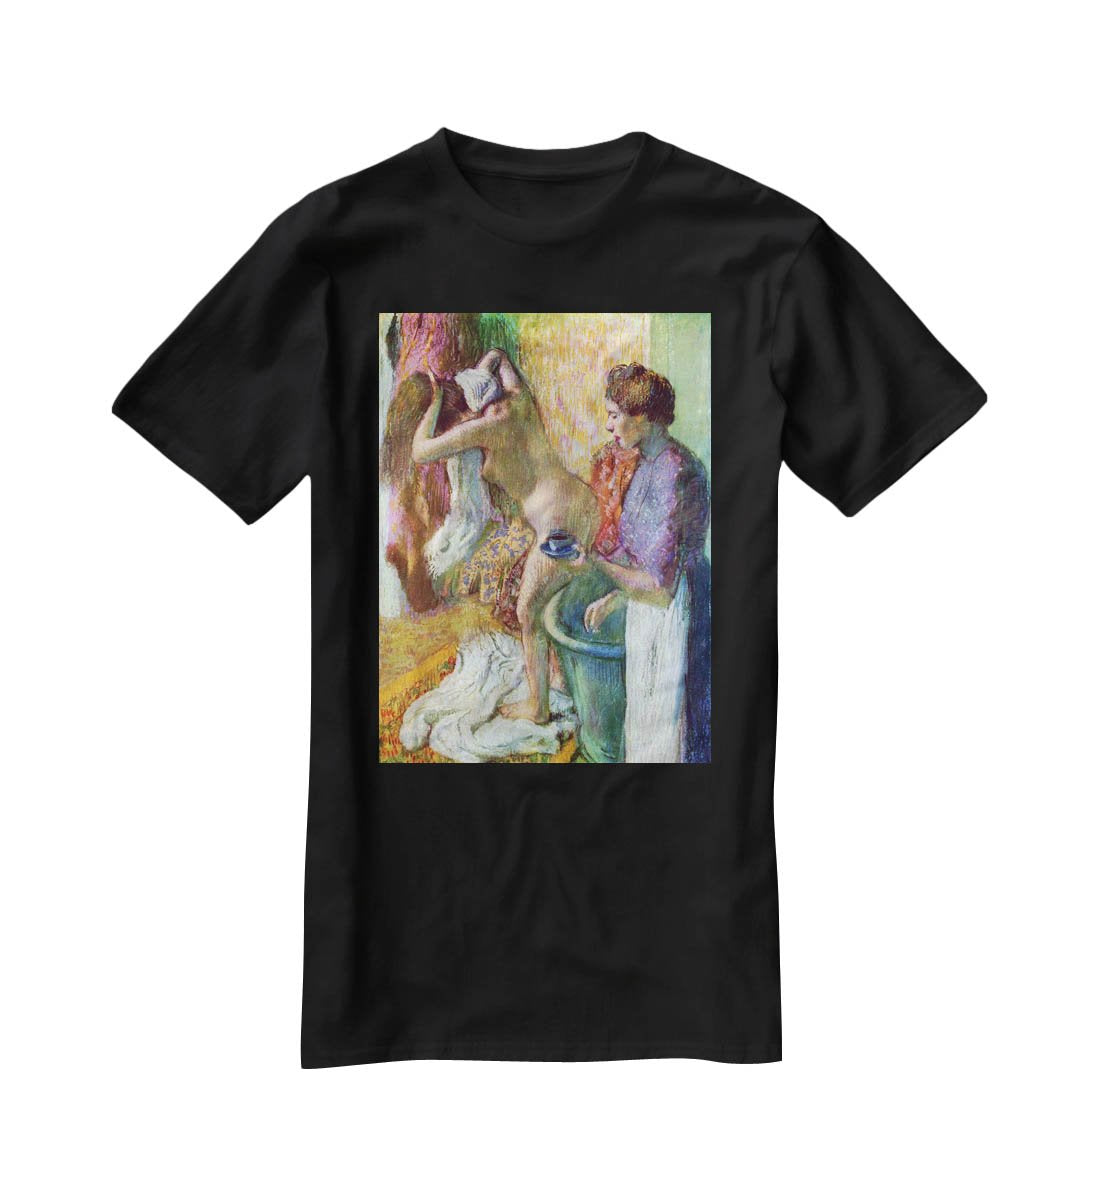 After bathing 1 by Degas T-Shirt - Canvas Art Rocks - 1